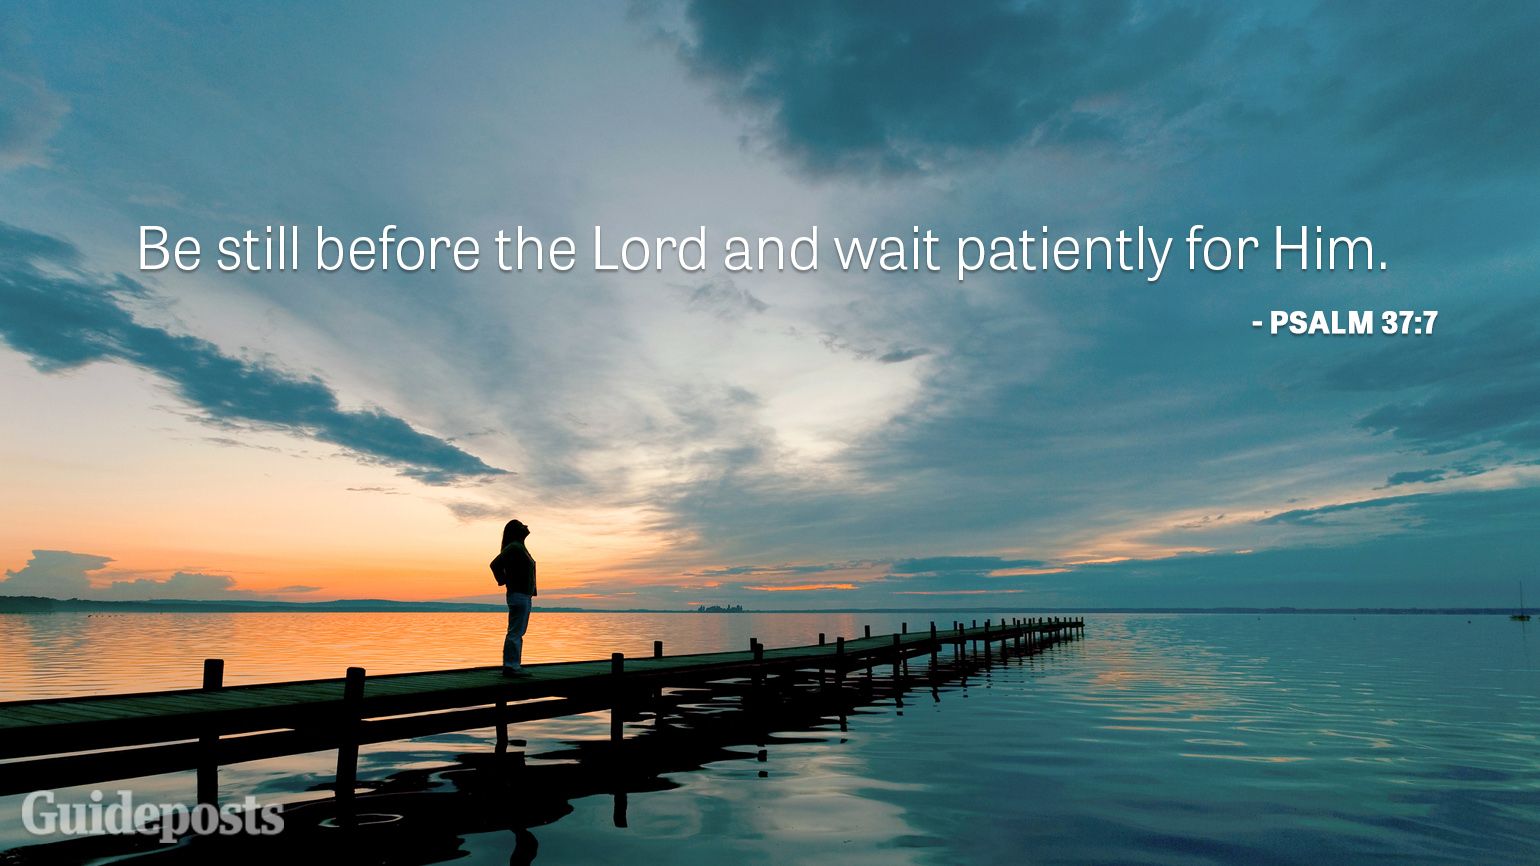 Be still before the Lord and wait patiently for Him.